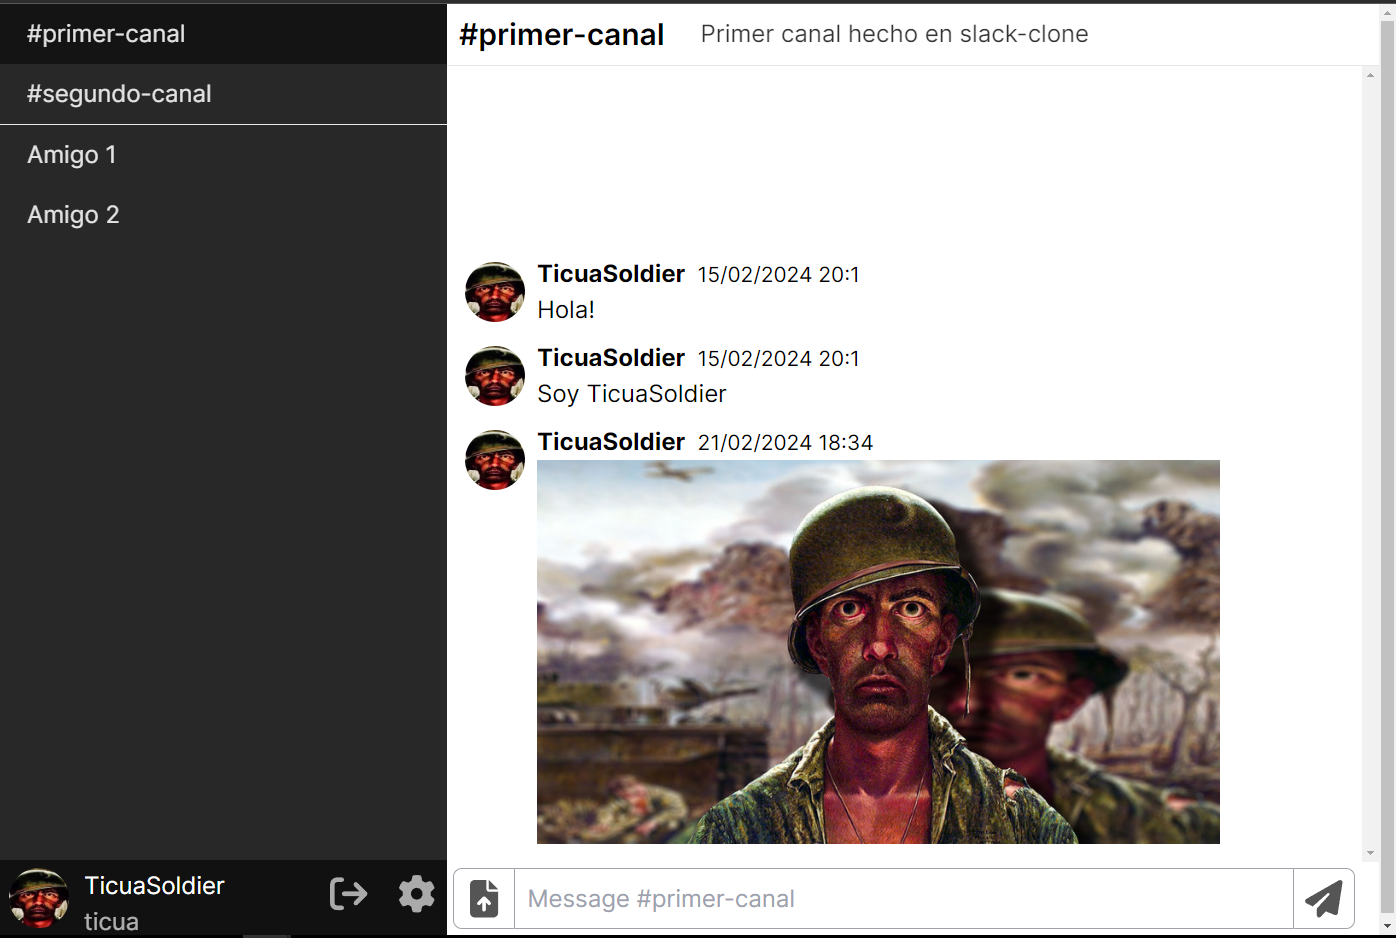 Image containing main page, user TicuaSoldier is chatting on channel #primer-canal